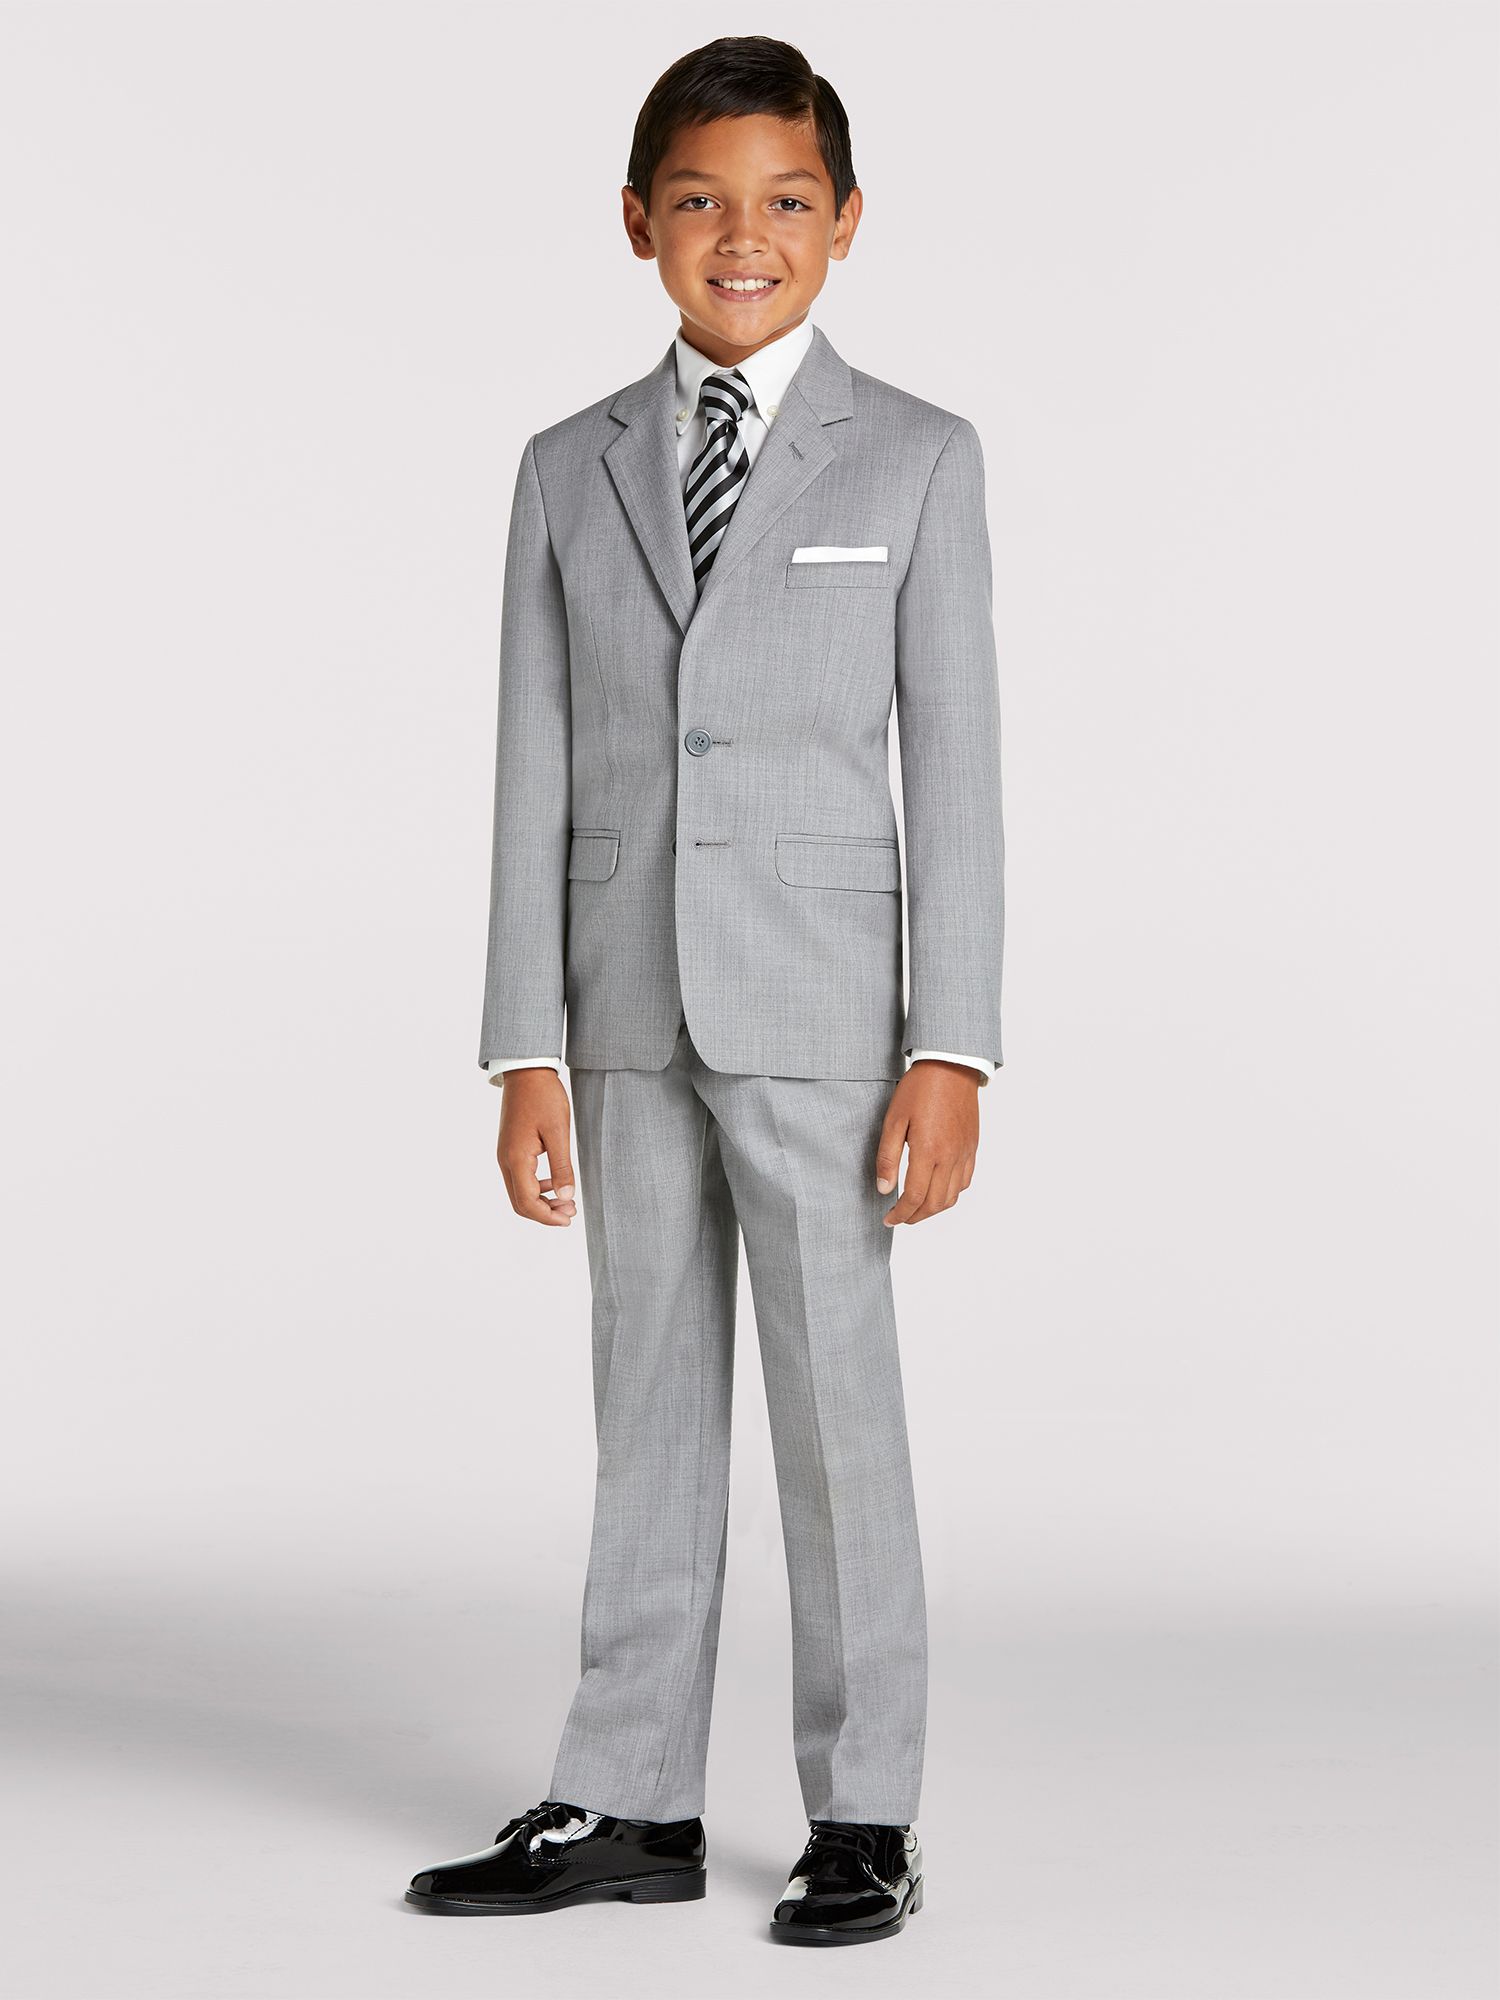 Boy's Grey Suit Rental by Joseph & Feiss | Moores Clothing